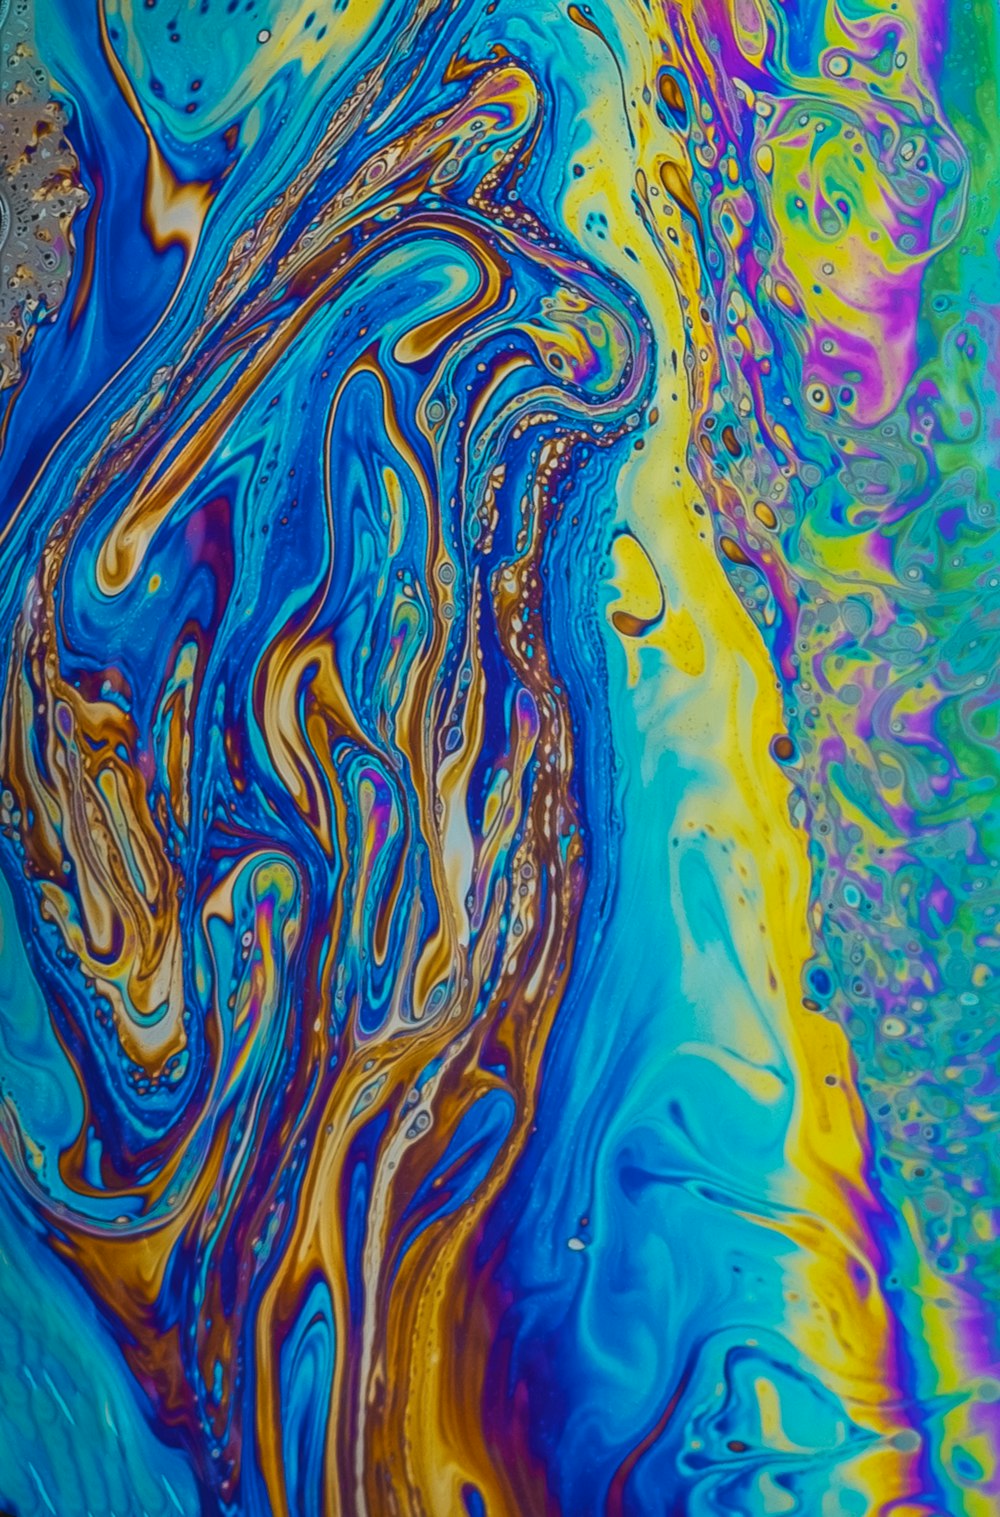 an abstract painting with blue, yellow, and orange colors